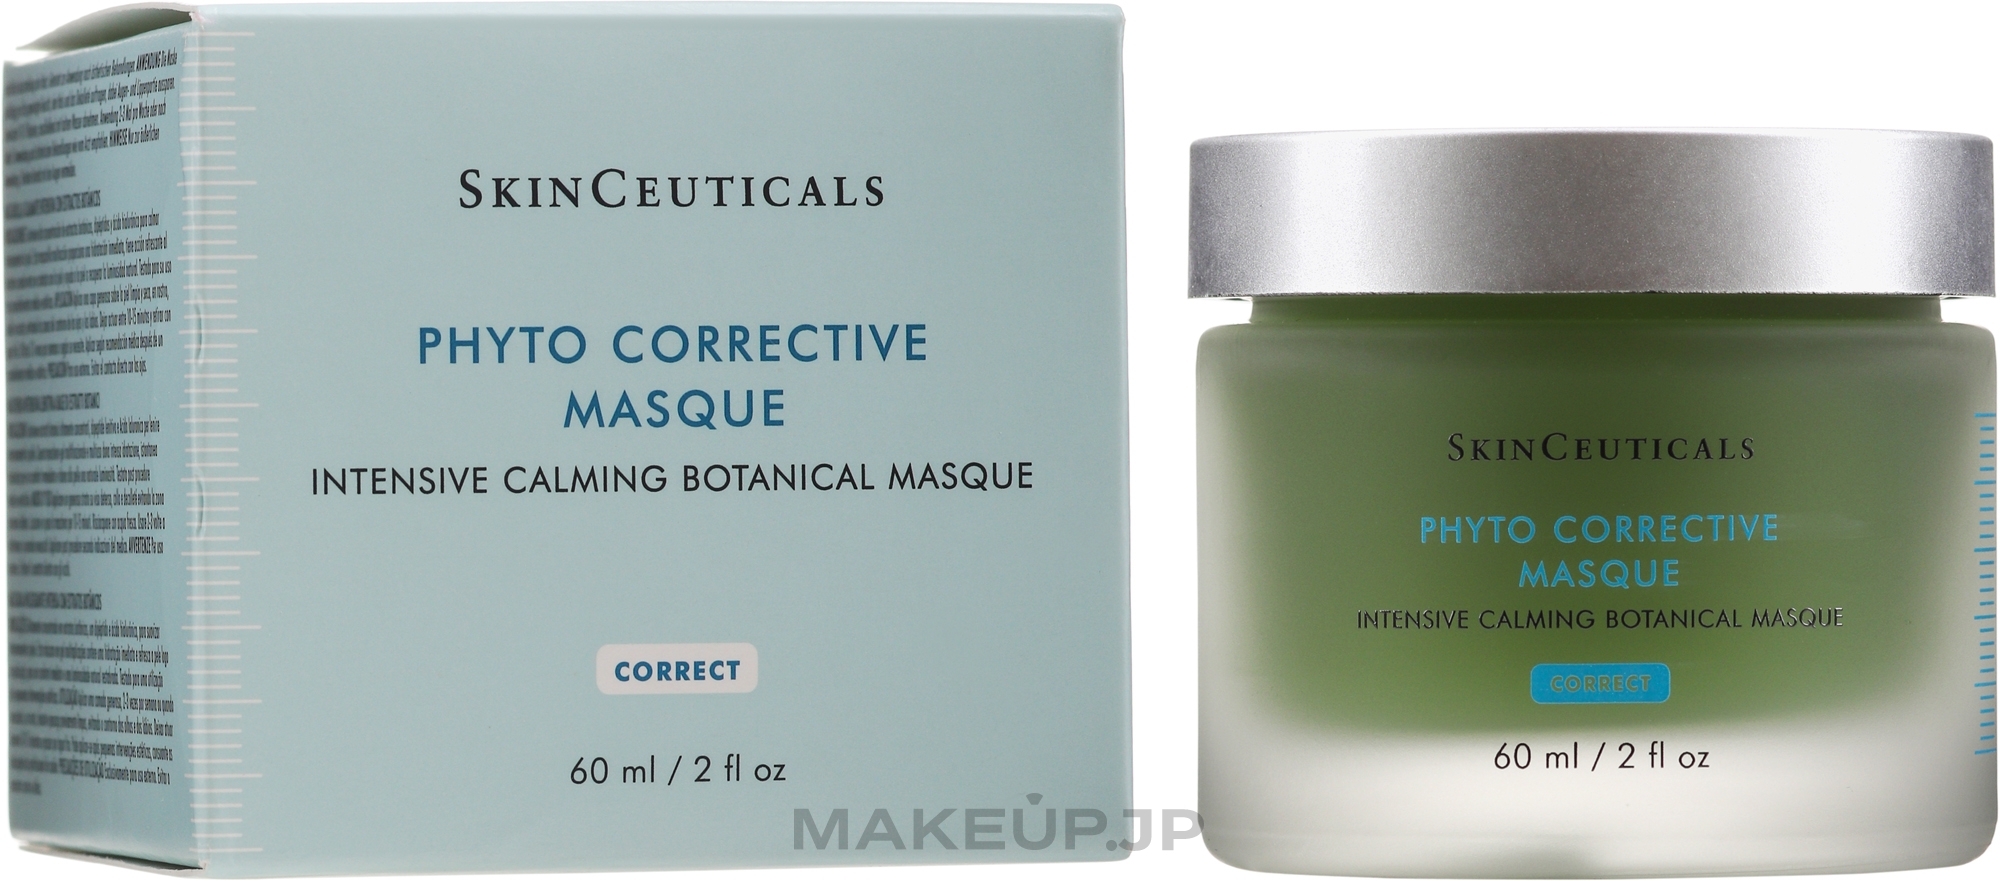 Multi-Active Soothing Mask - SkinCeuticals Phyto Corrective Mask — photo 60 ml